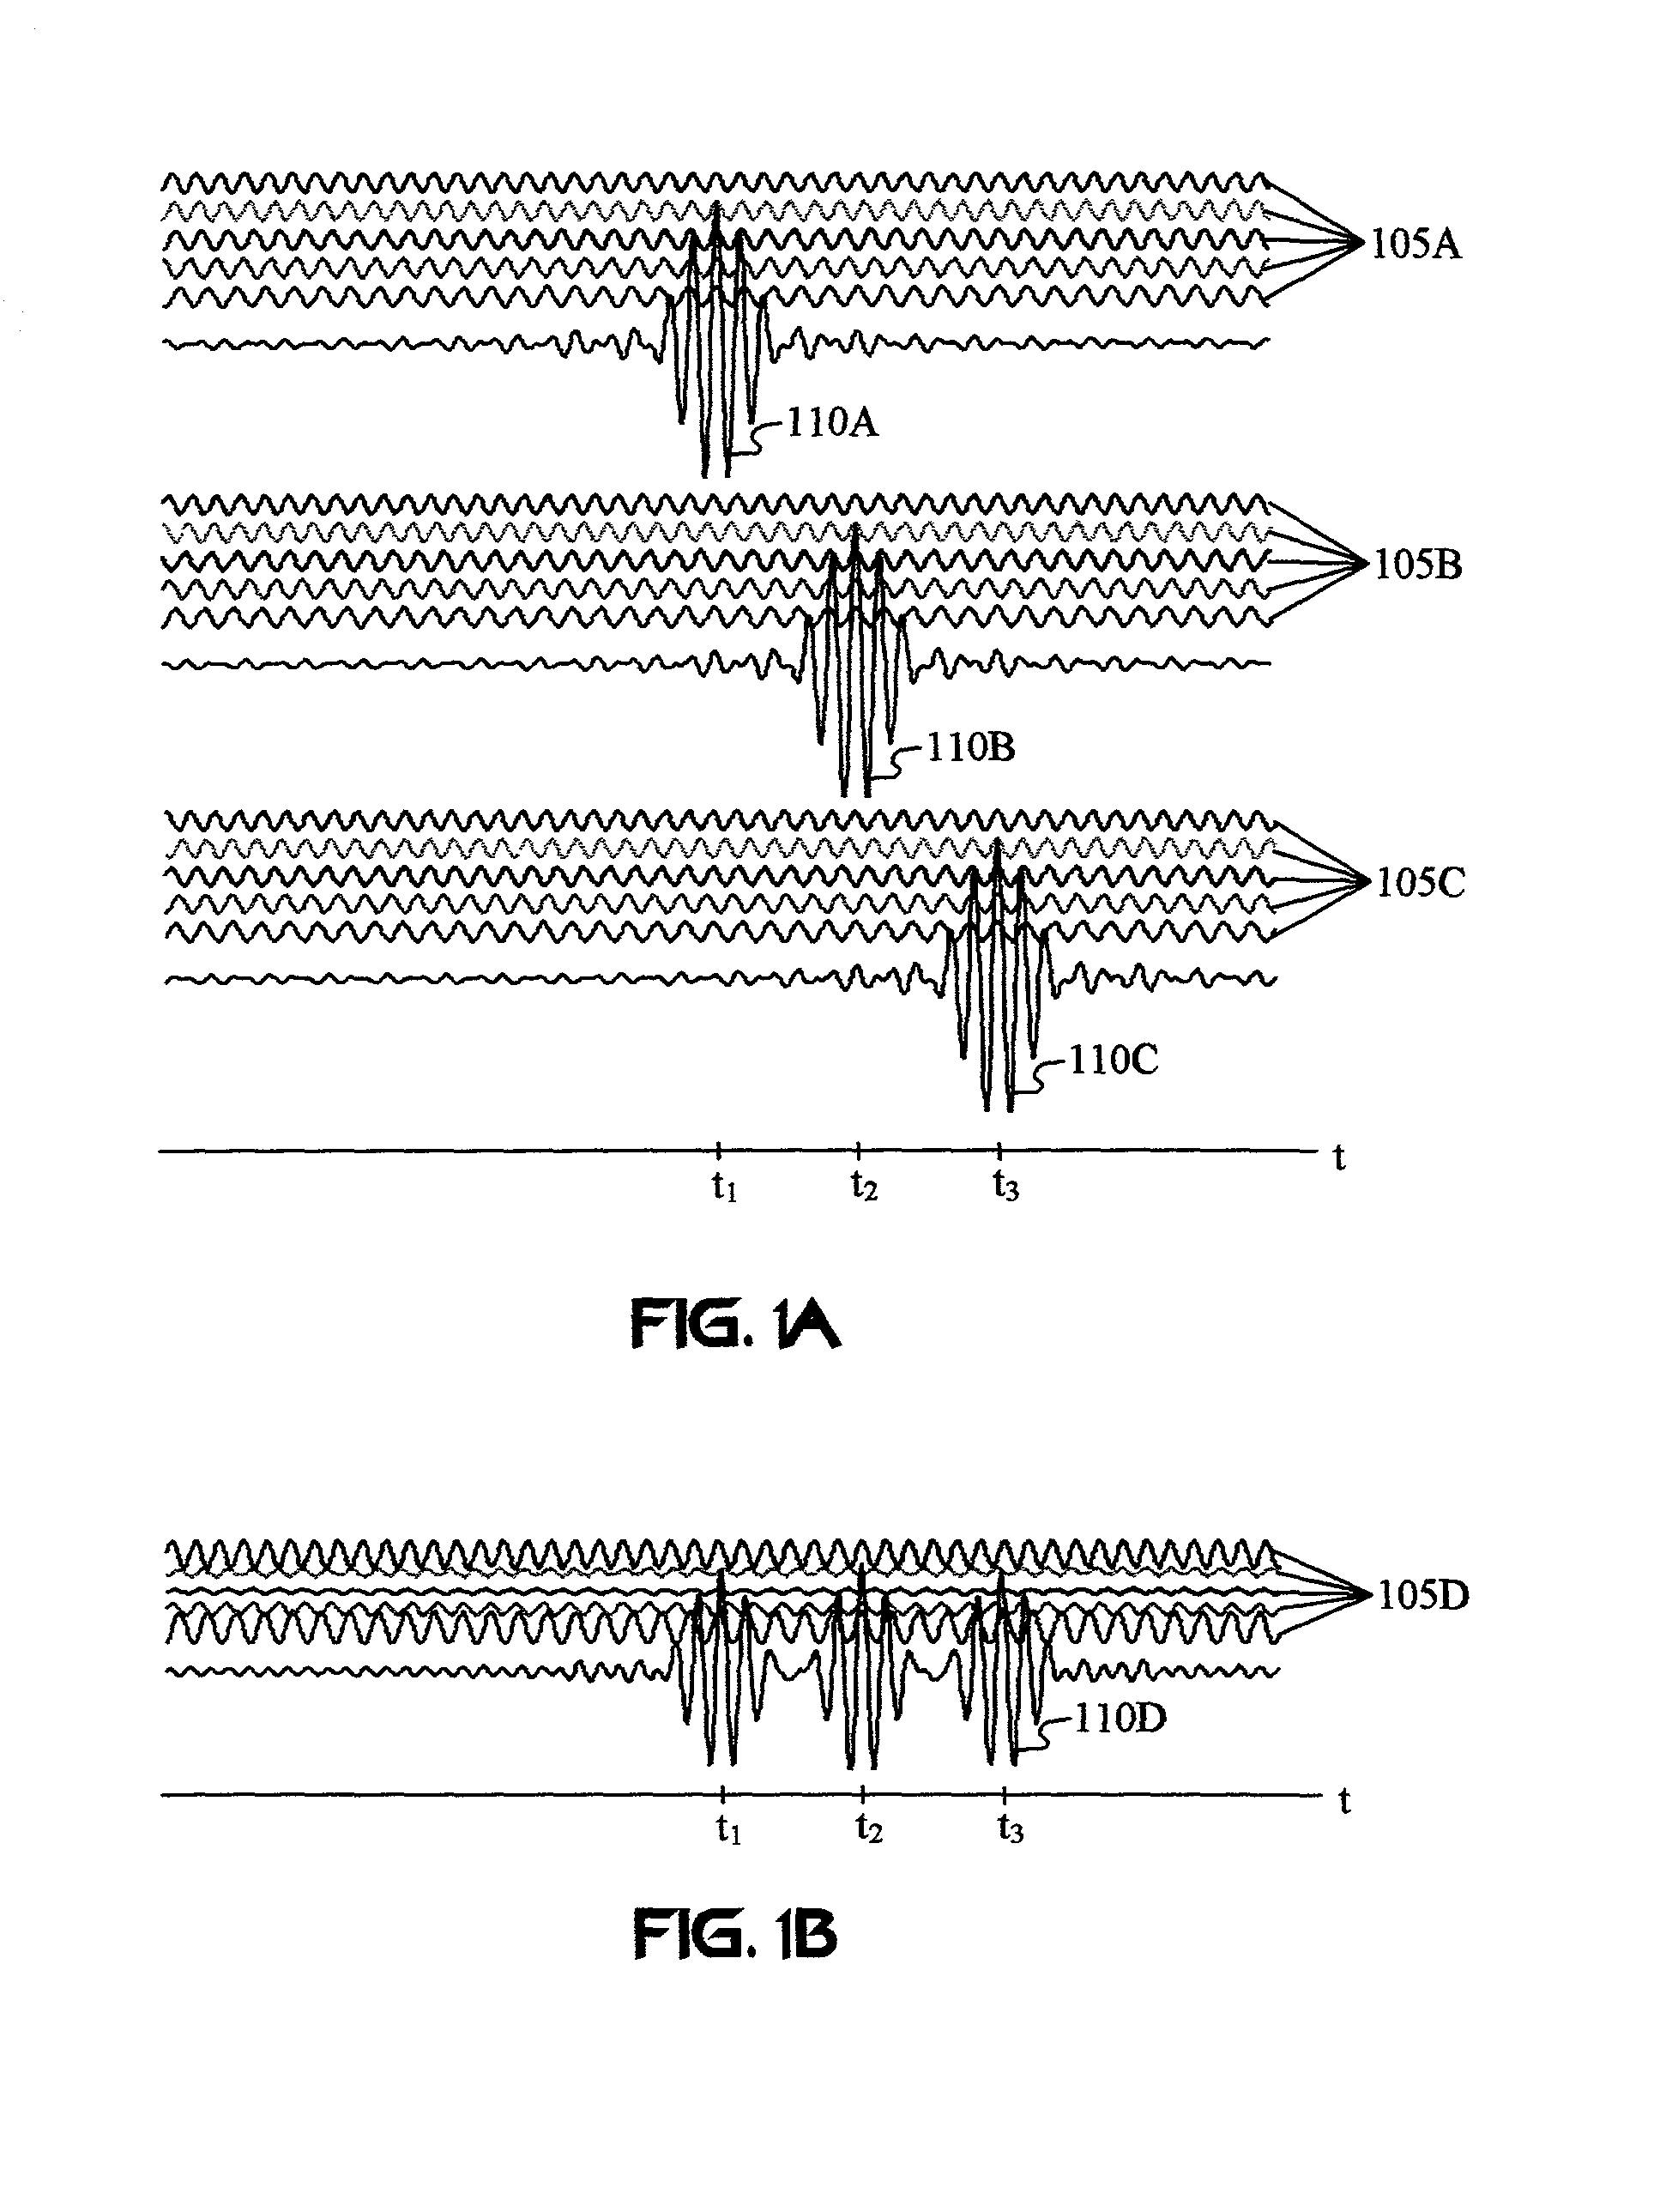 Multicarrier sub-layer for direct sequence channel and multiple-access coding